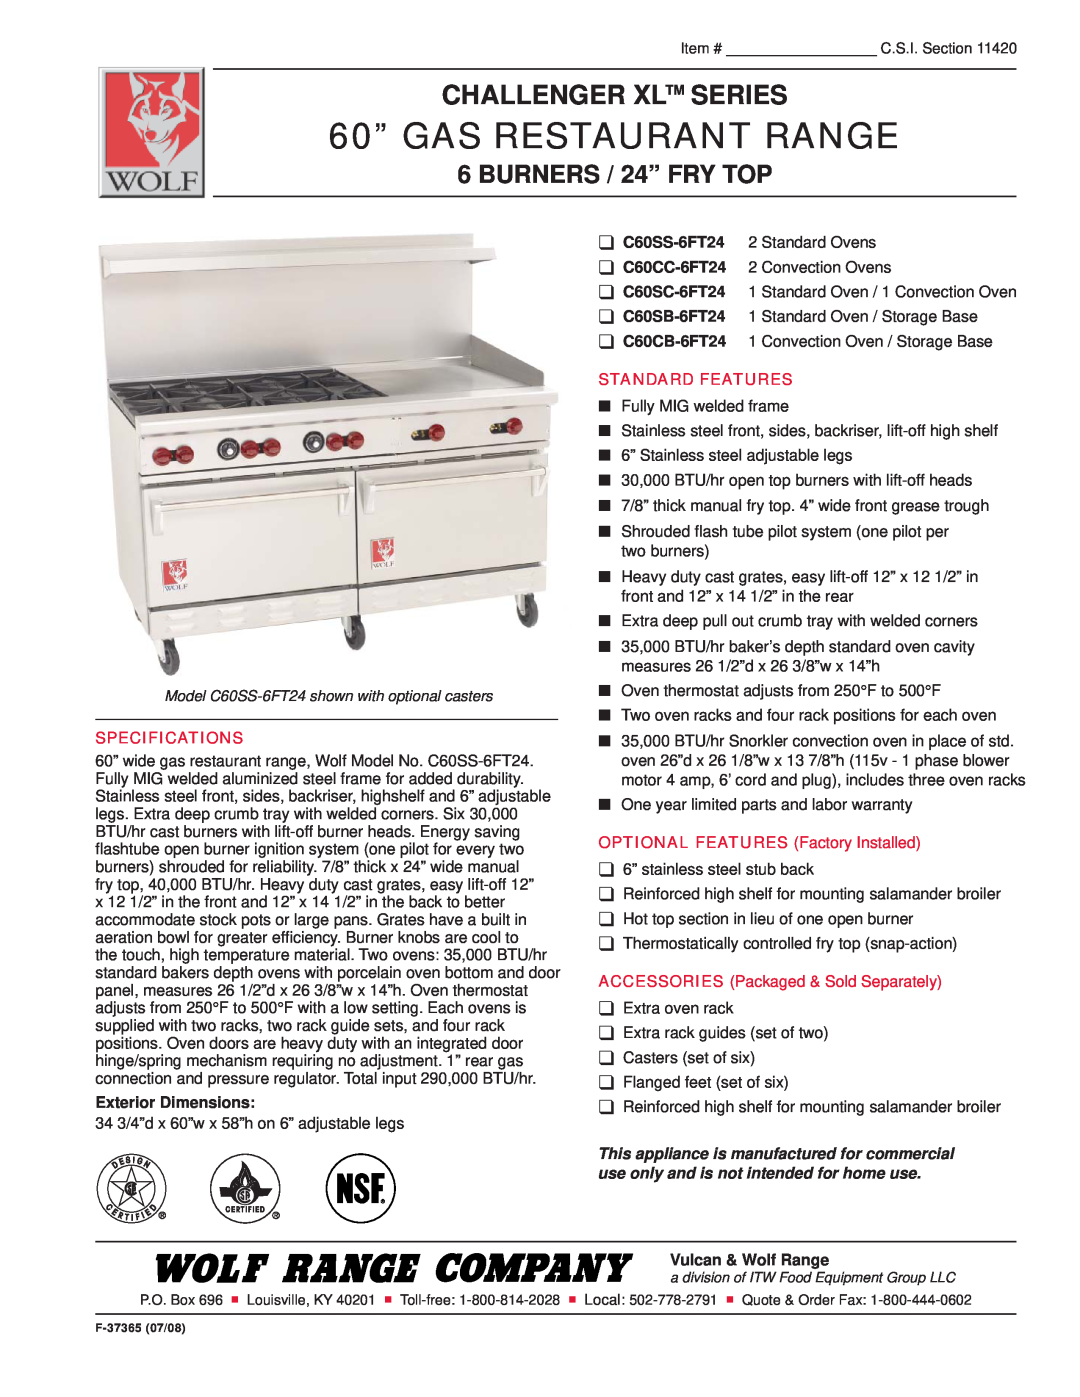 Wolf C60CC-6FT24 specifications 60” GAS RESTAURANT RANGE, Challenger Xl Series, BURNERS / 24” FRY TOP, Specifications 